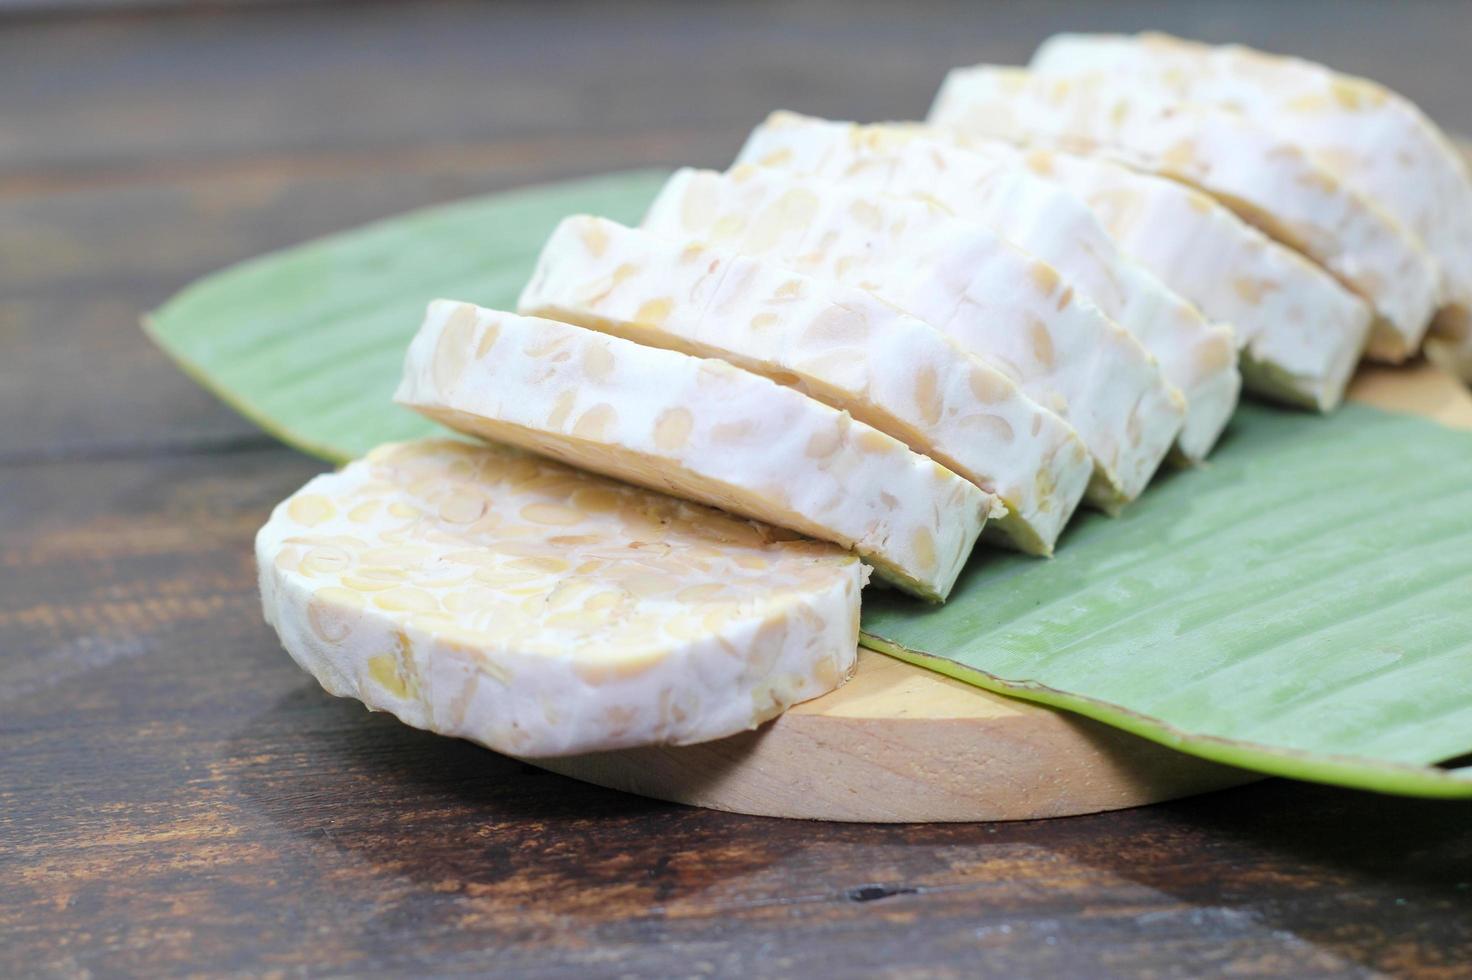 Tempeh or tempe is a traditional food from Indonesia made from soybeans or other ingredients that are processed through fermentation and is already popular in many countries. photo